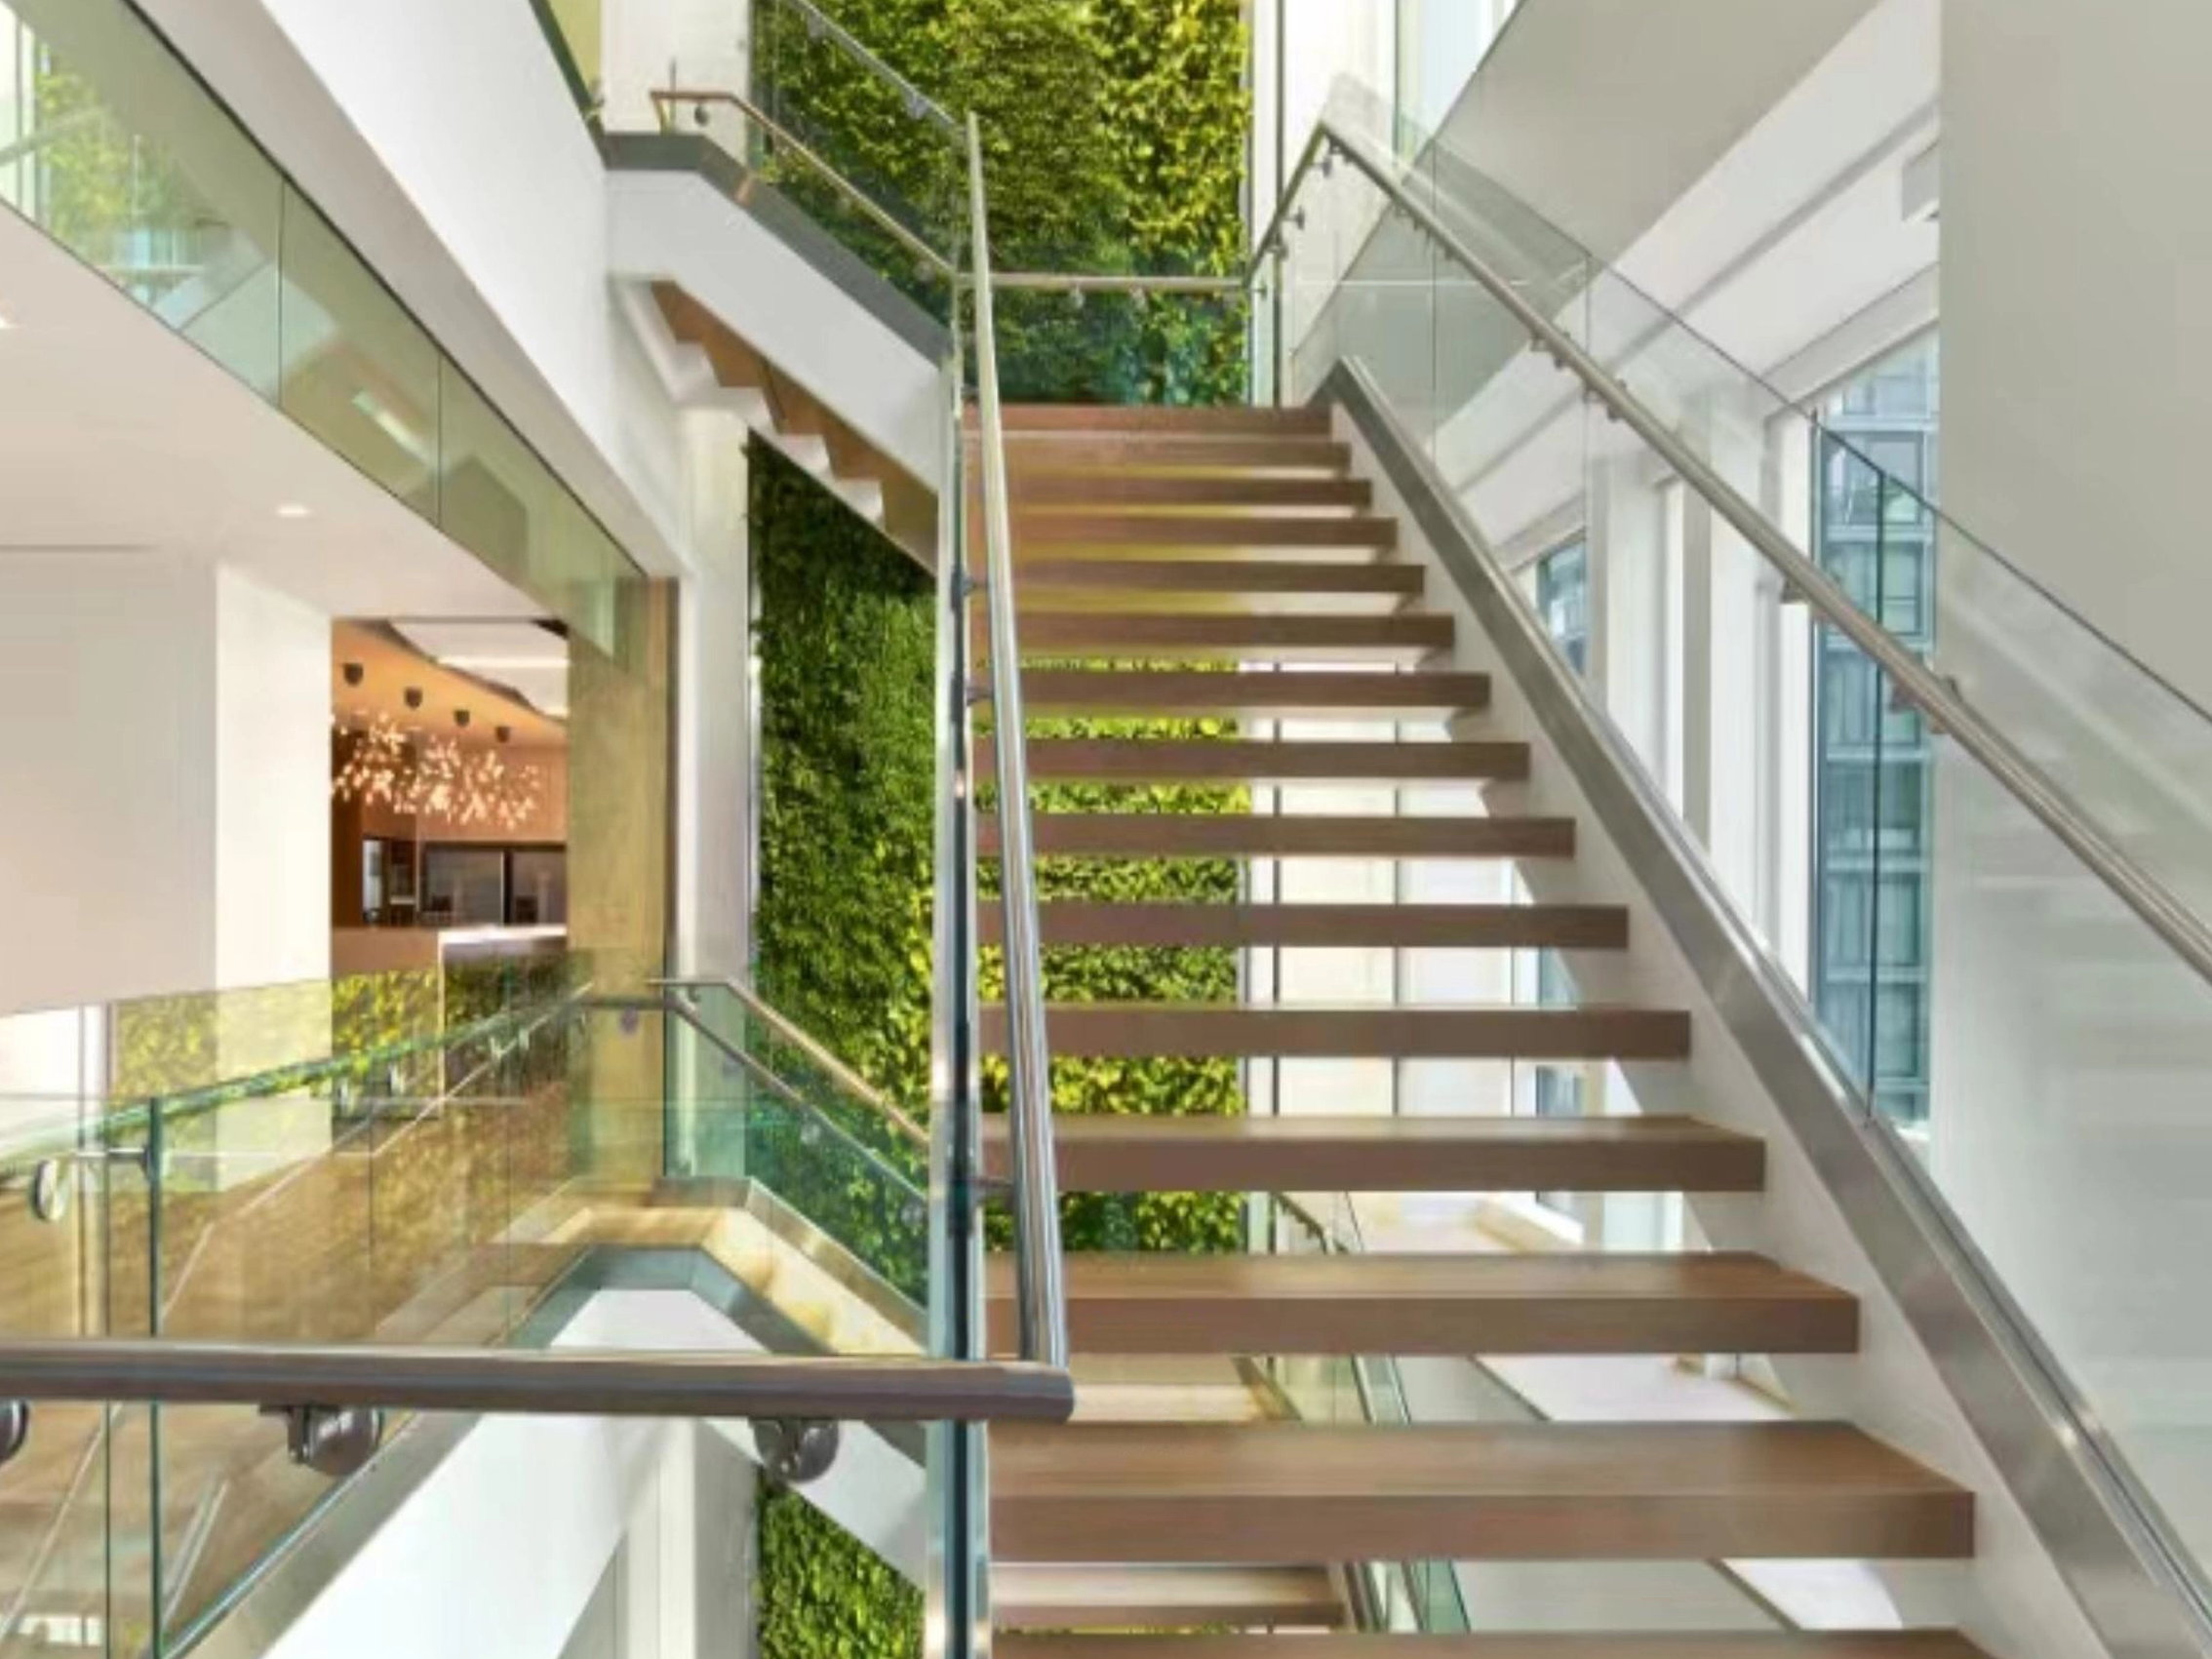 Interior staircase, stainless steel handrail, background green wall